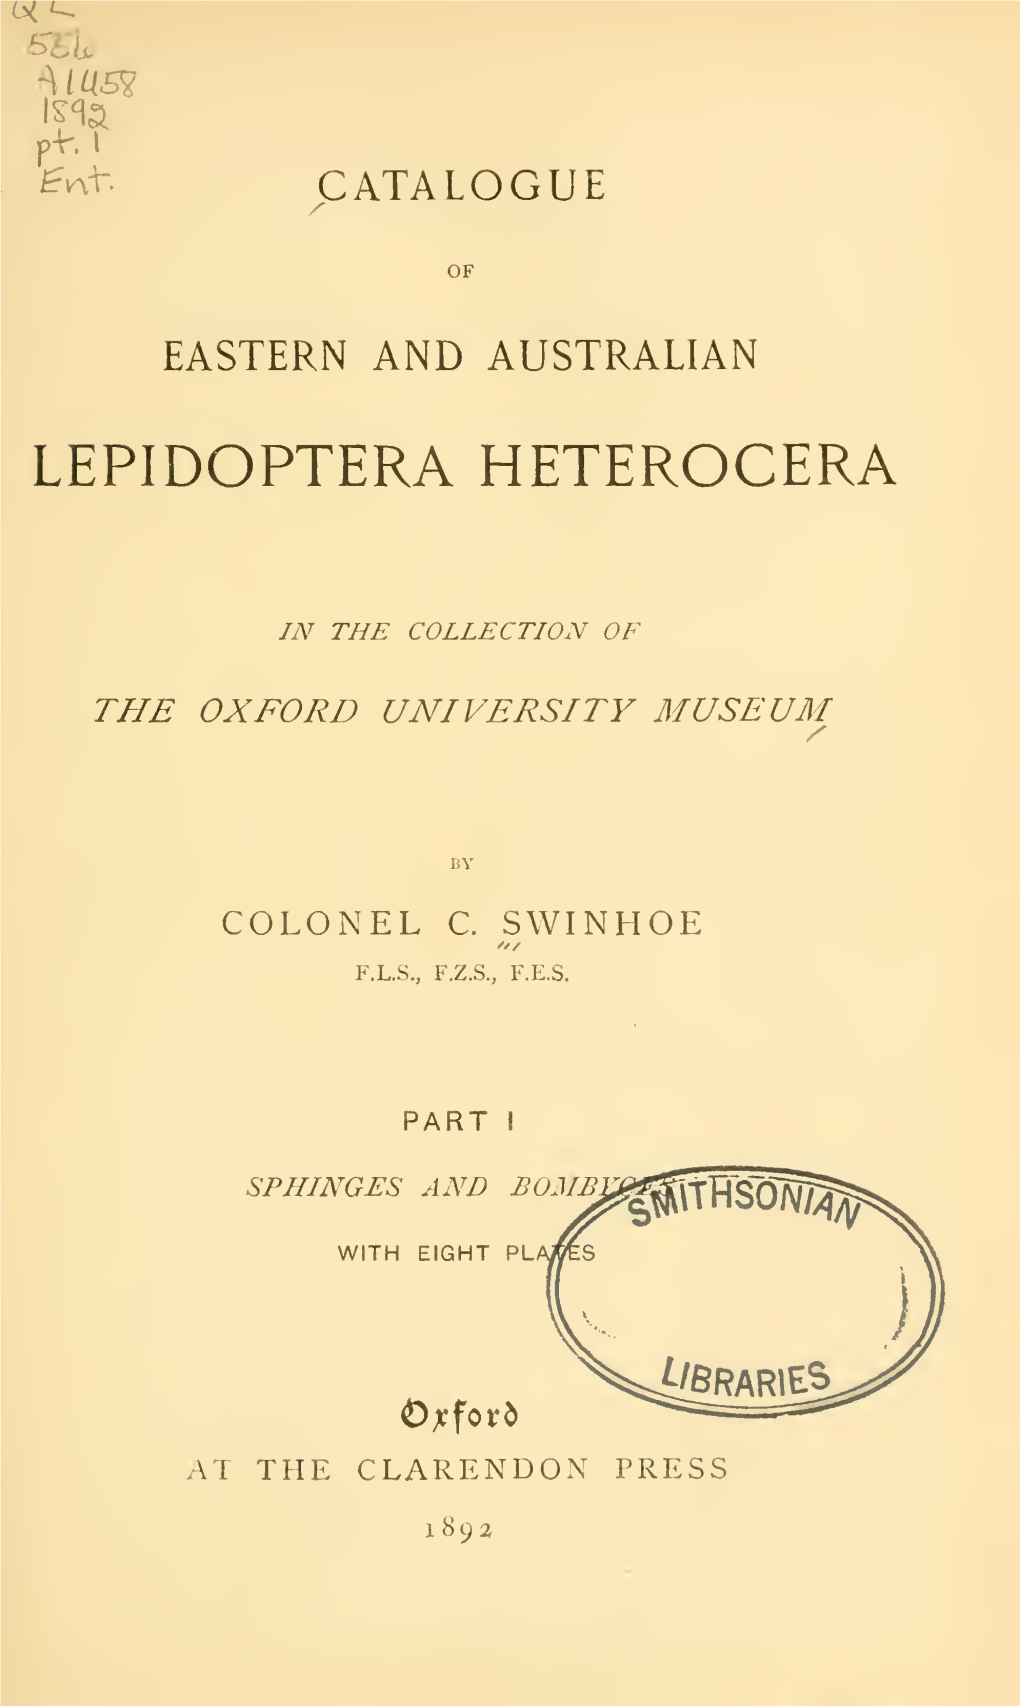 Catalogue of Eastern and Australian Lepidoptera Heterocera in The